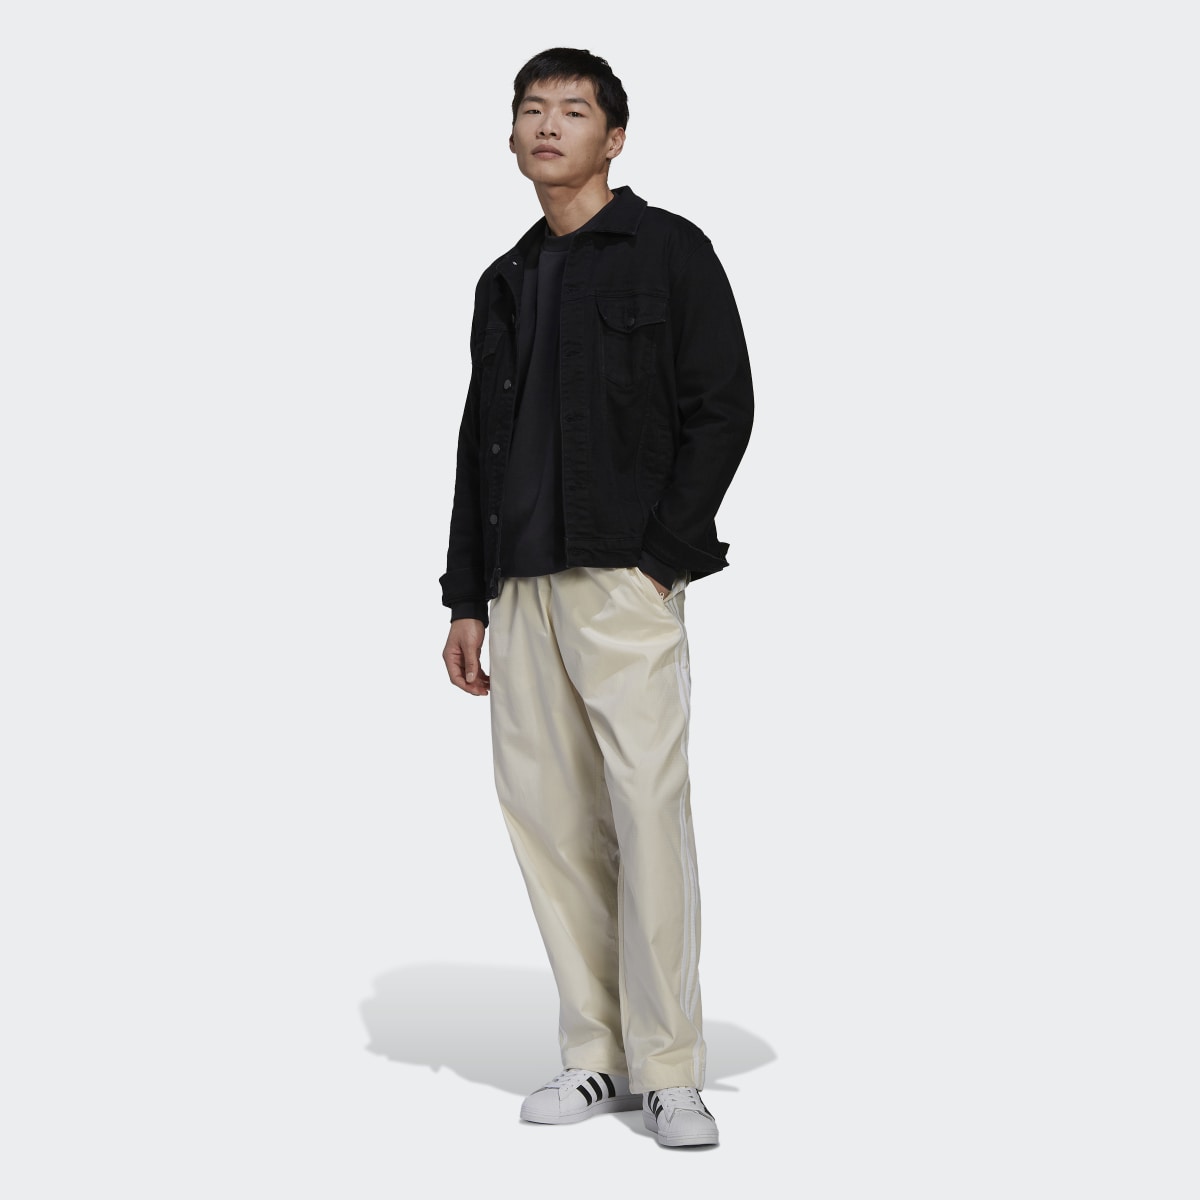 Adidas Work Trousers. 5